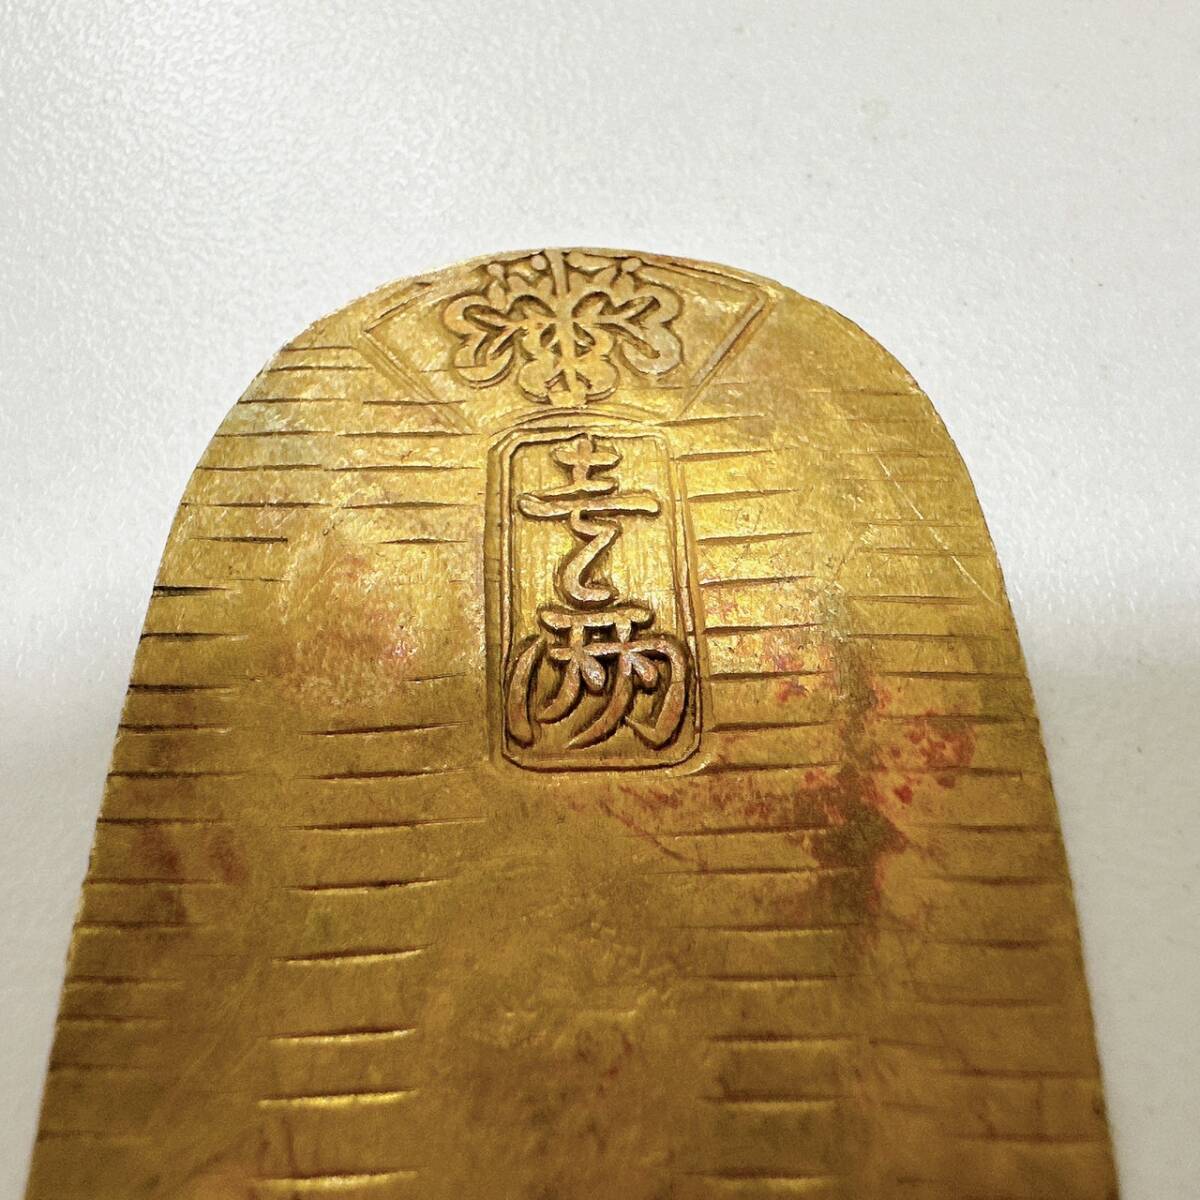 [TOA-5846]1 jpy ~ writing . small stamp gold amount eyes approximately 12.9g approximately 61.2% reverse side stamp . stamp god old coin money small stamp small stamp gold large size gold old gold silver collection present condition storage goods 